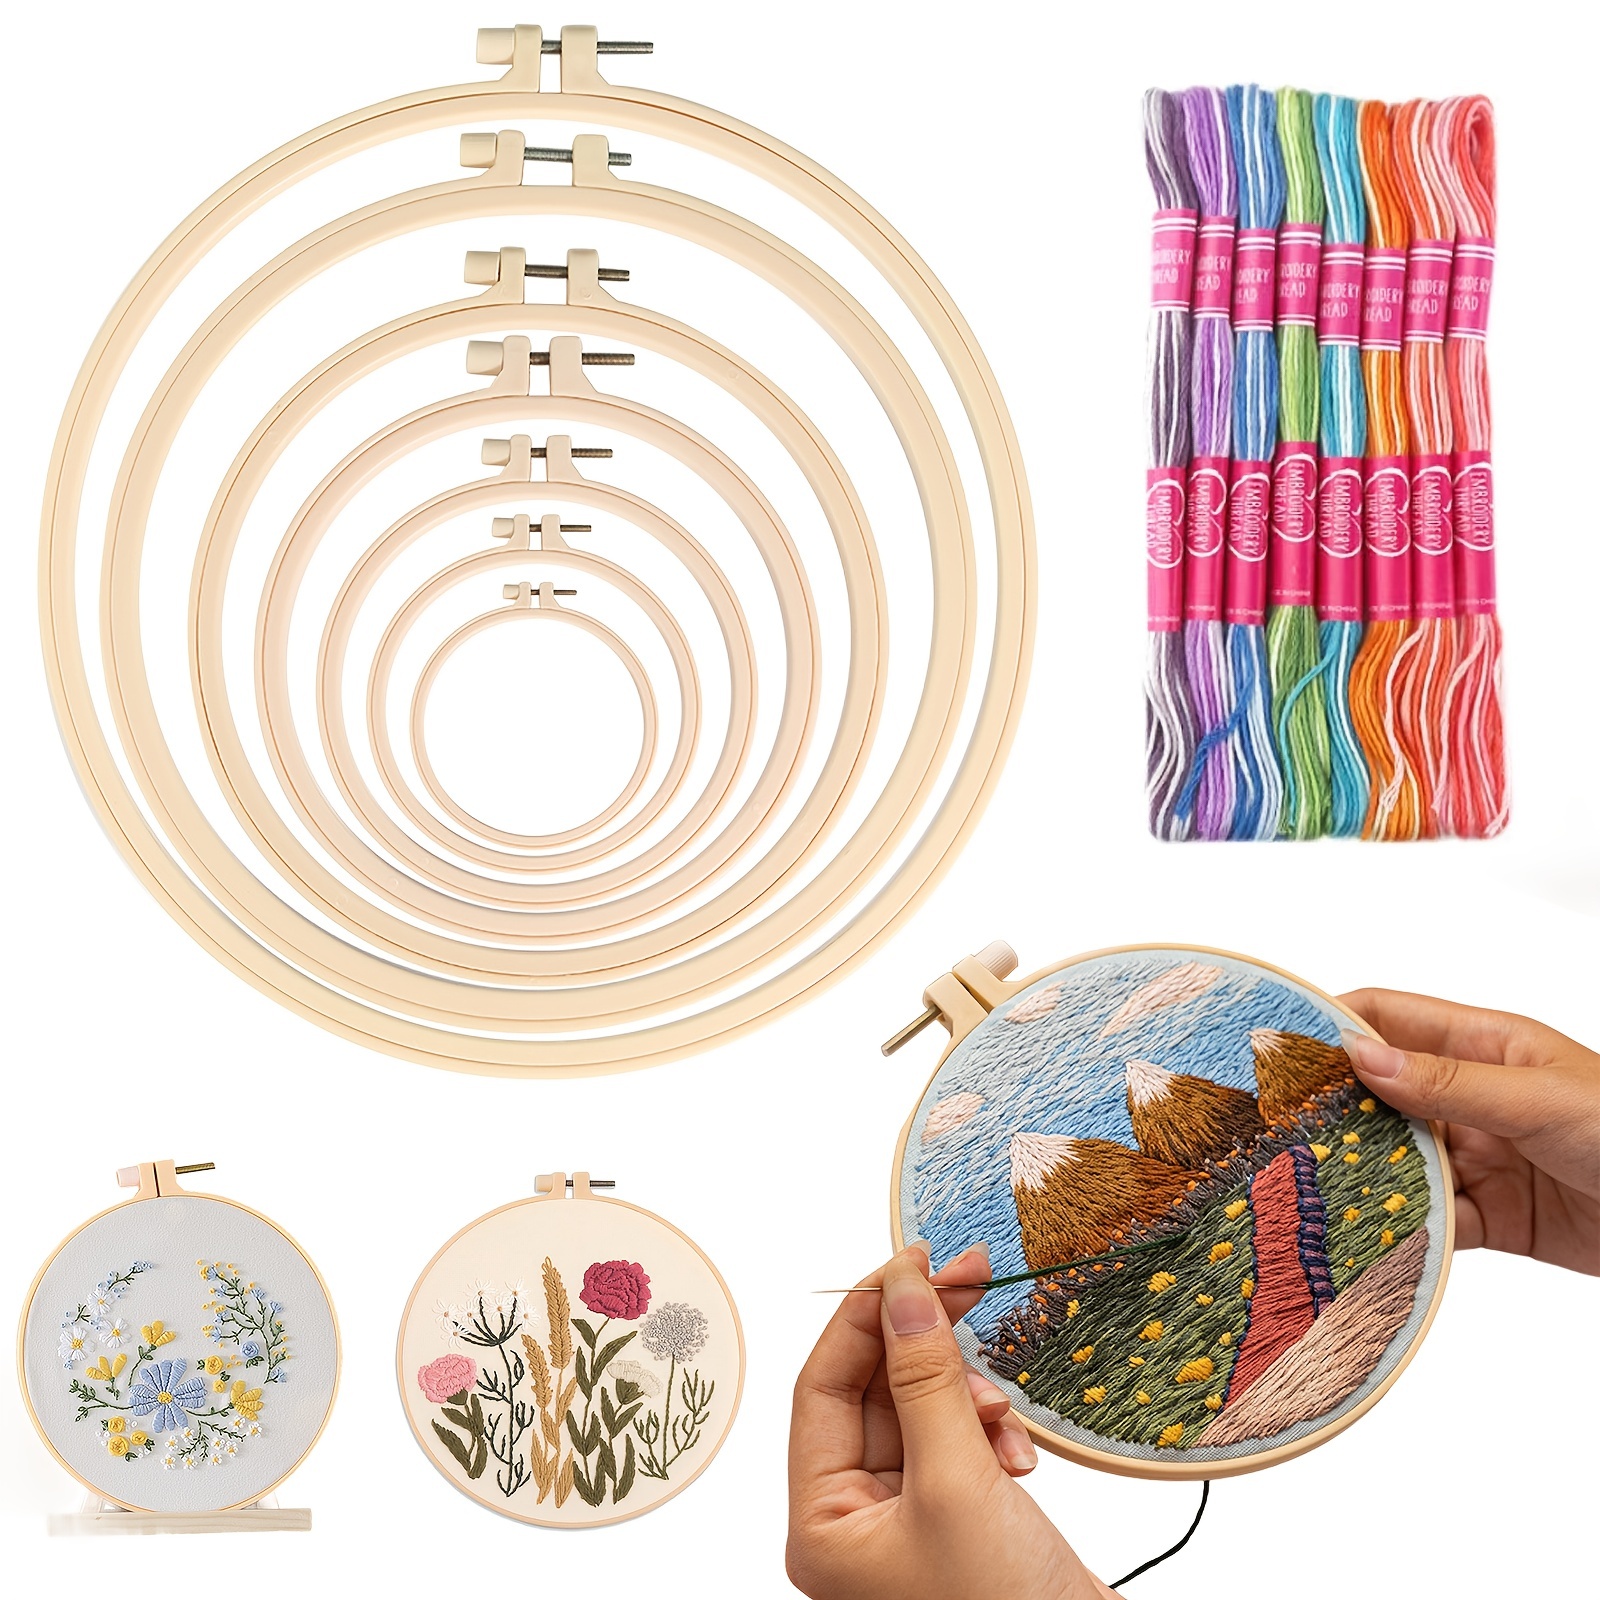  Bamboo Round Embroidery Hoop - Umoonfine 8 Pieces 8 Inches  Embroidery Hoops Adjustable Bamboo Circle Cross Stitch Hoop for Creating  Embroidery Pieces,Ornament Crafts : Everything Else